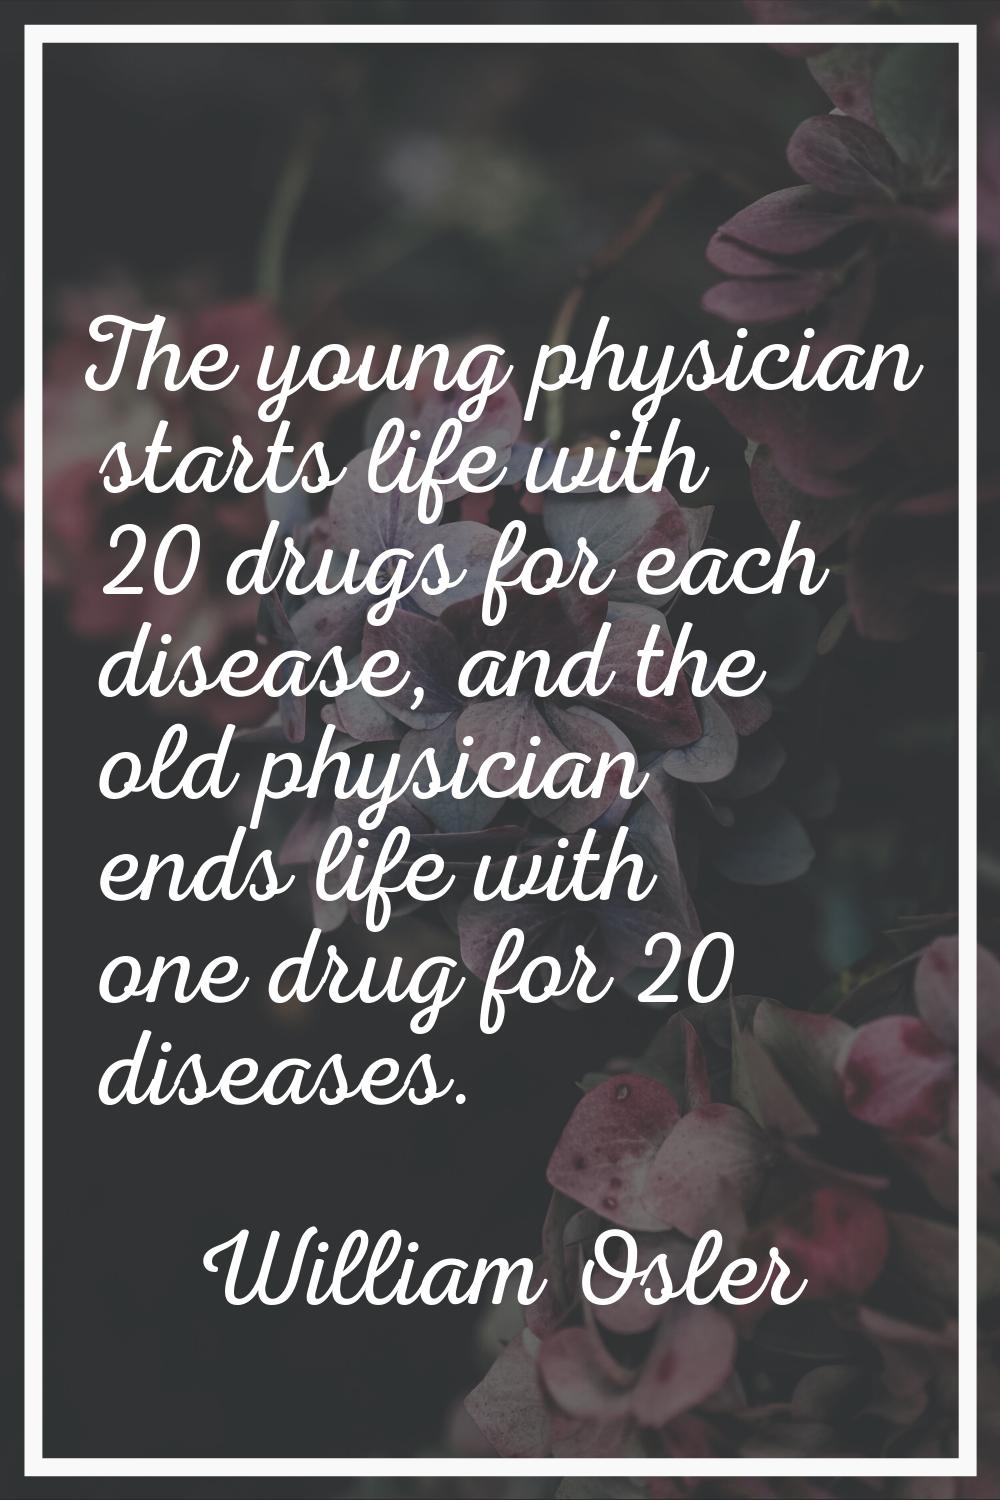 The young physician starts life with 20 drugs for each disease, and the old physician ends life wit